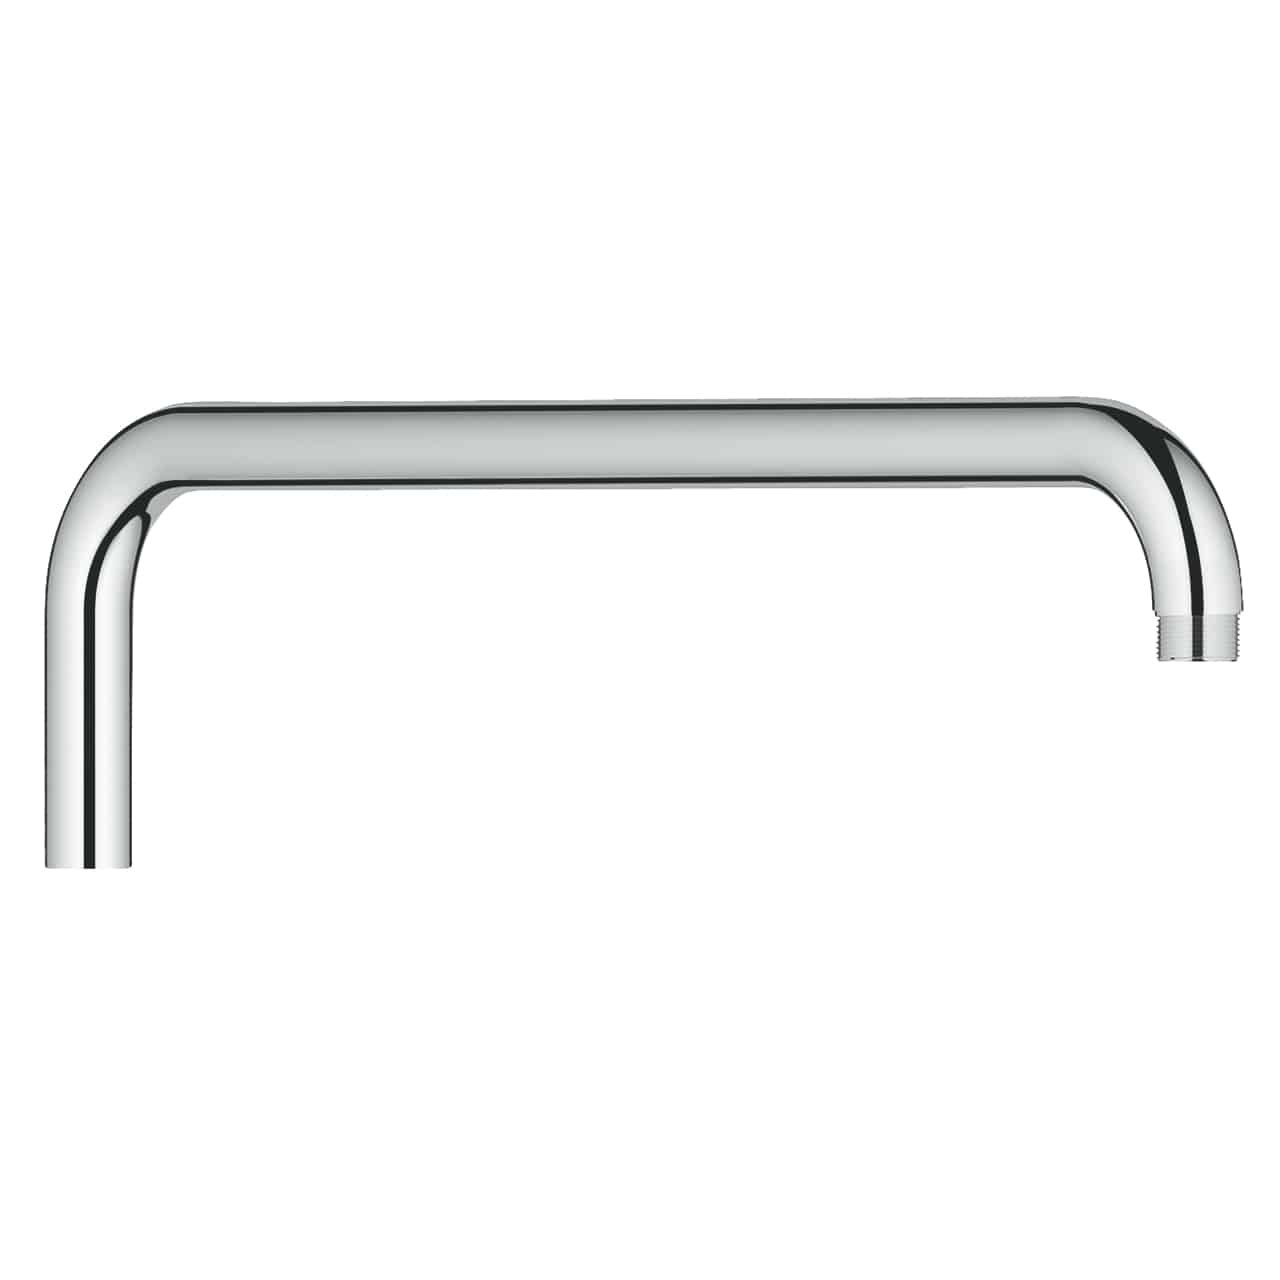 Grohe 390mm Arm for Rainshower System-14014000-9274